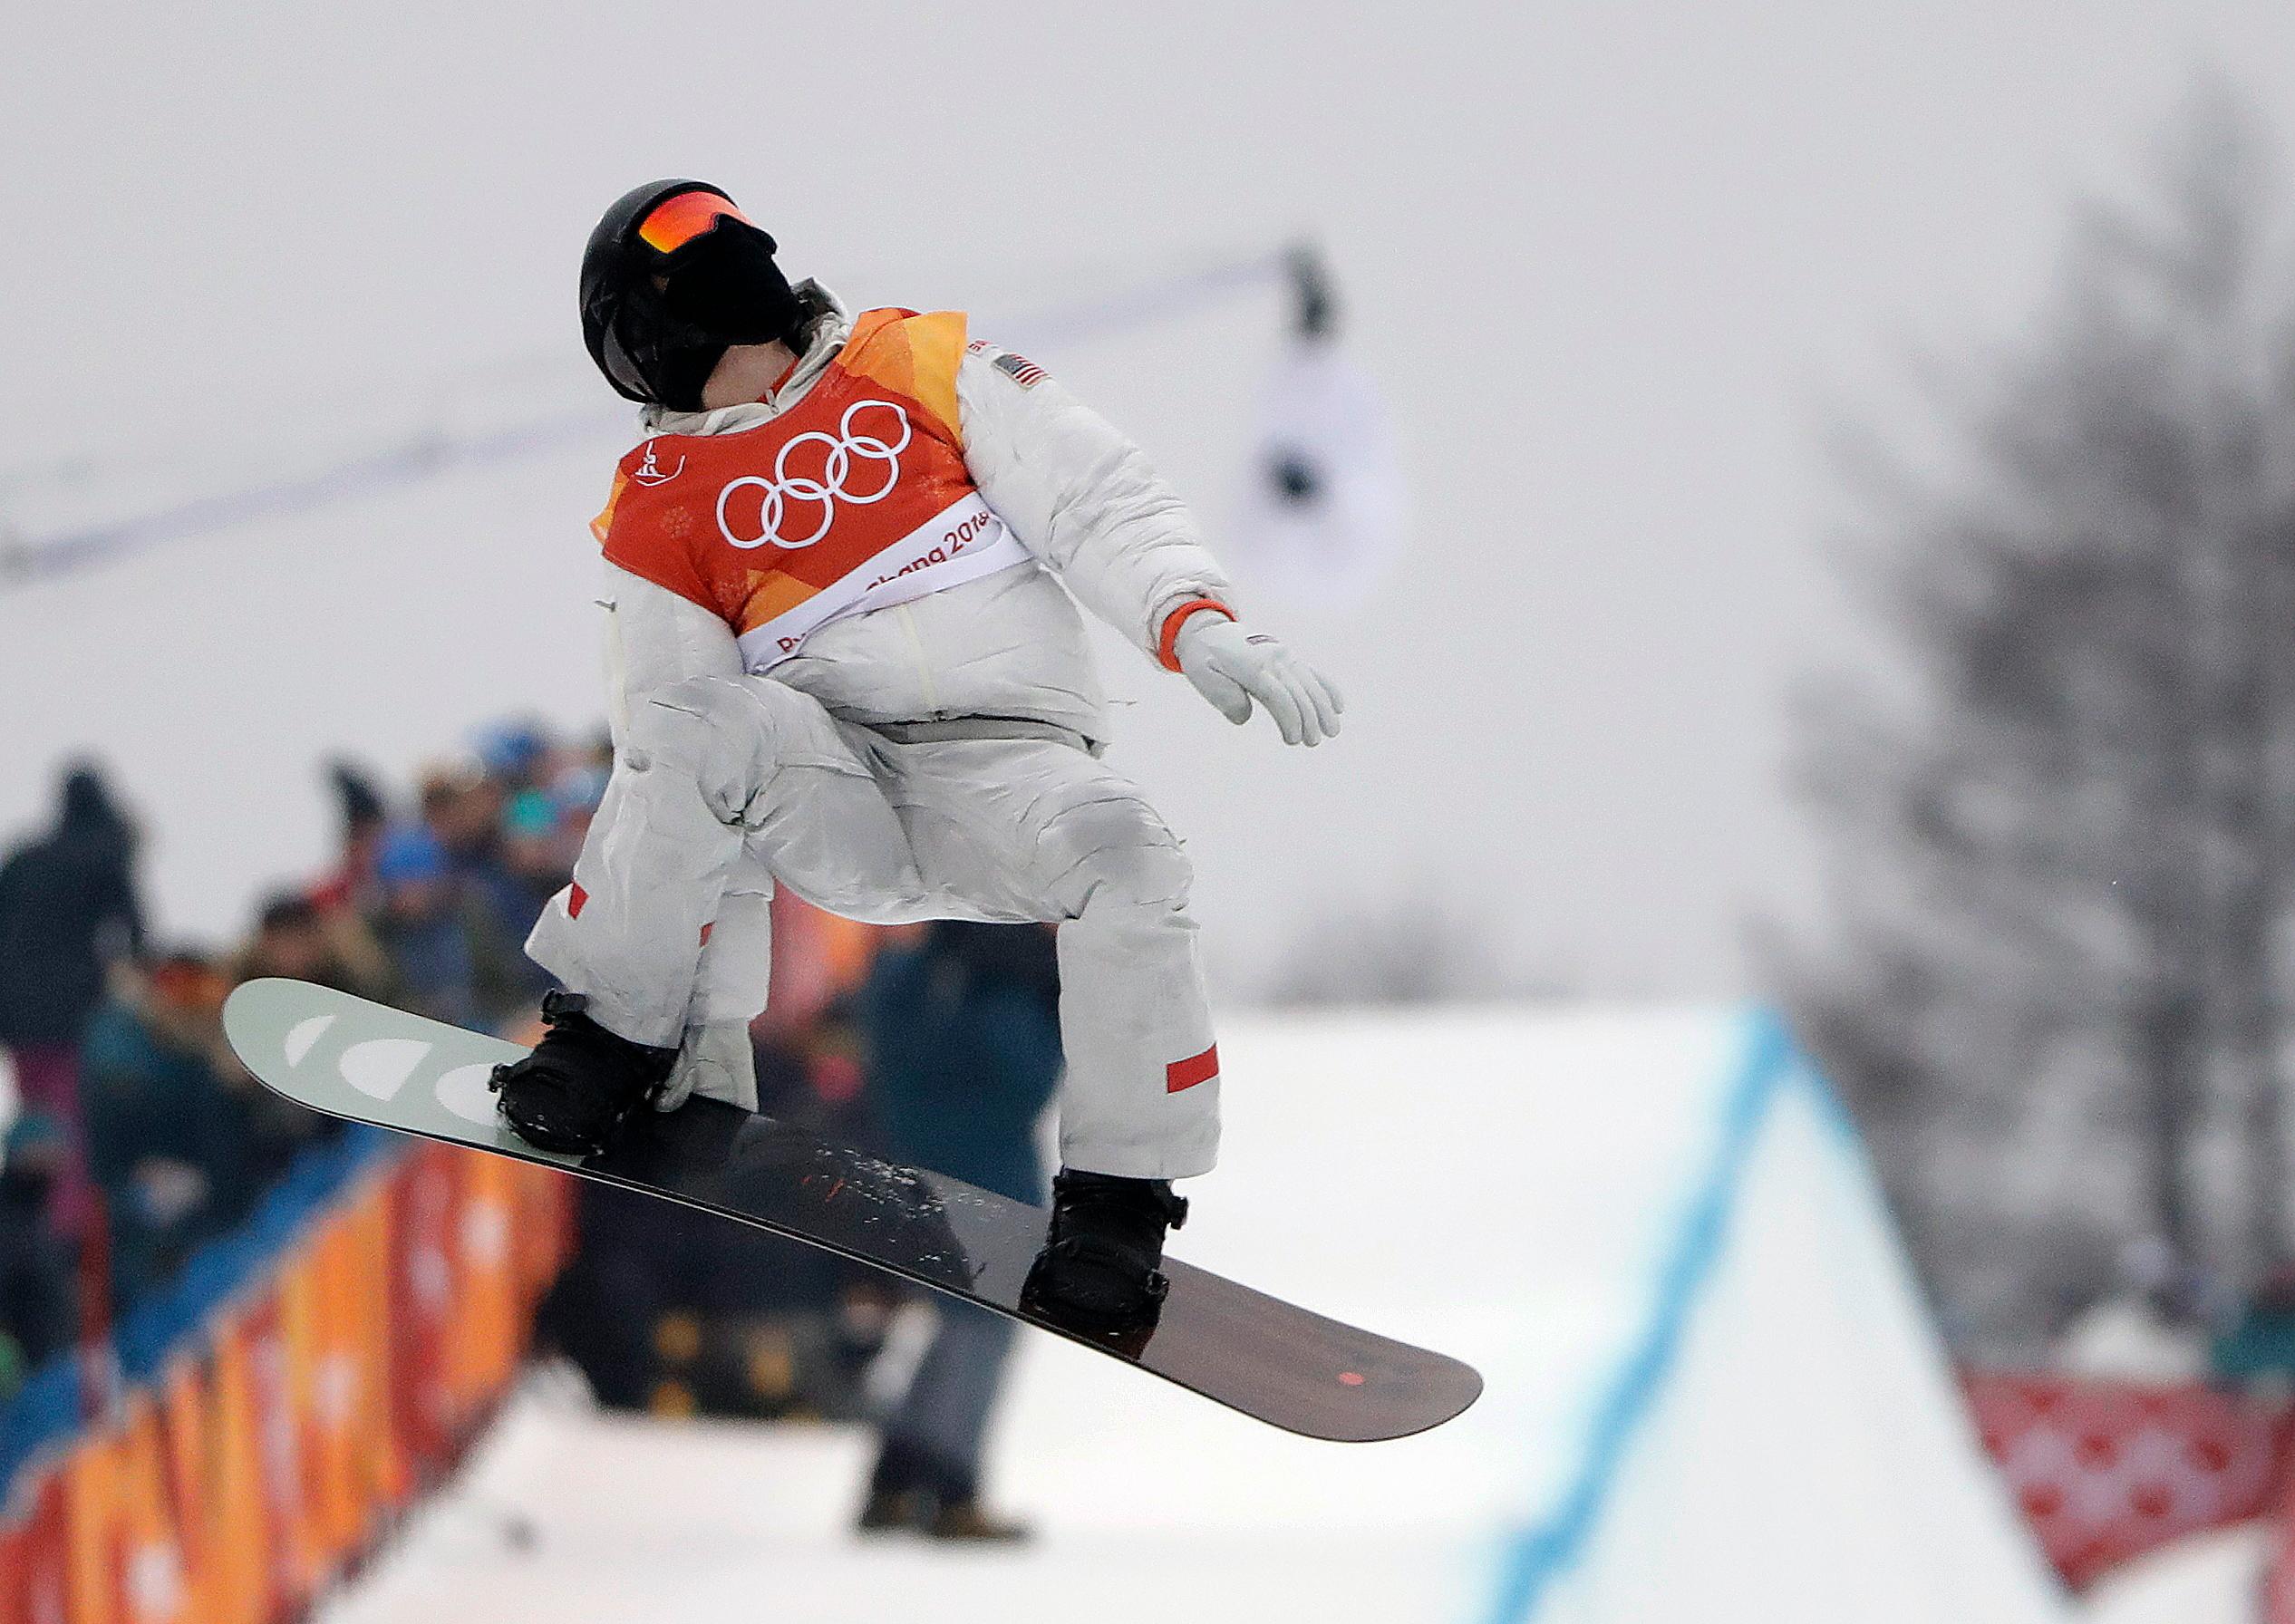 Shaun White wins 3rd Olympic gold in contest for the ages | WOAI